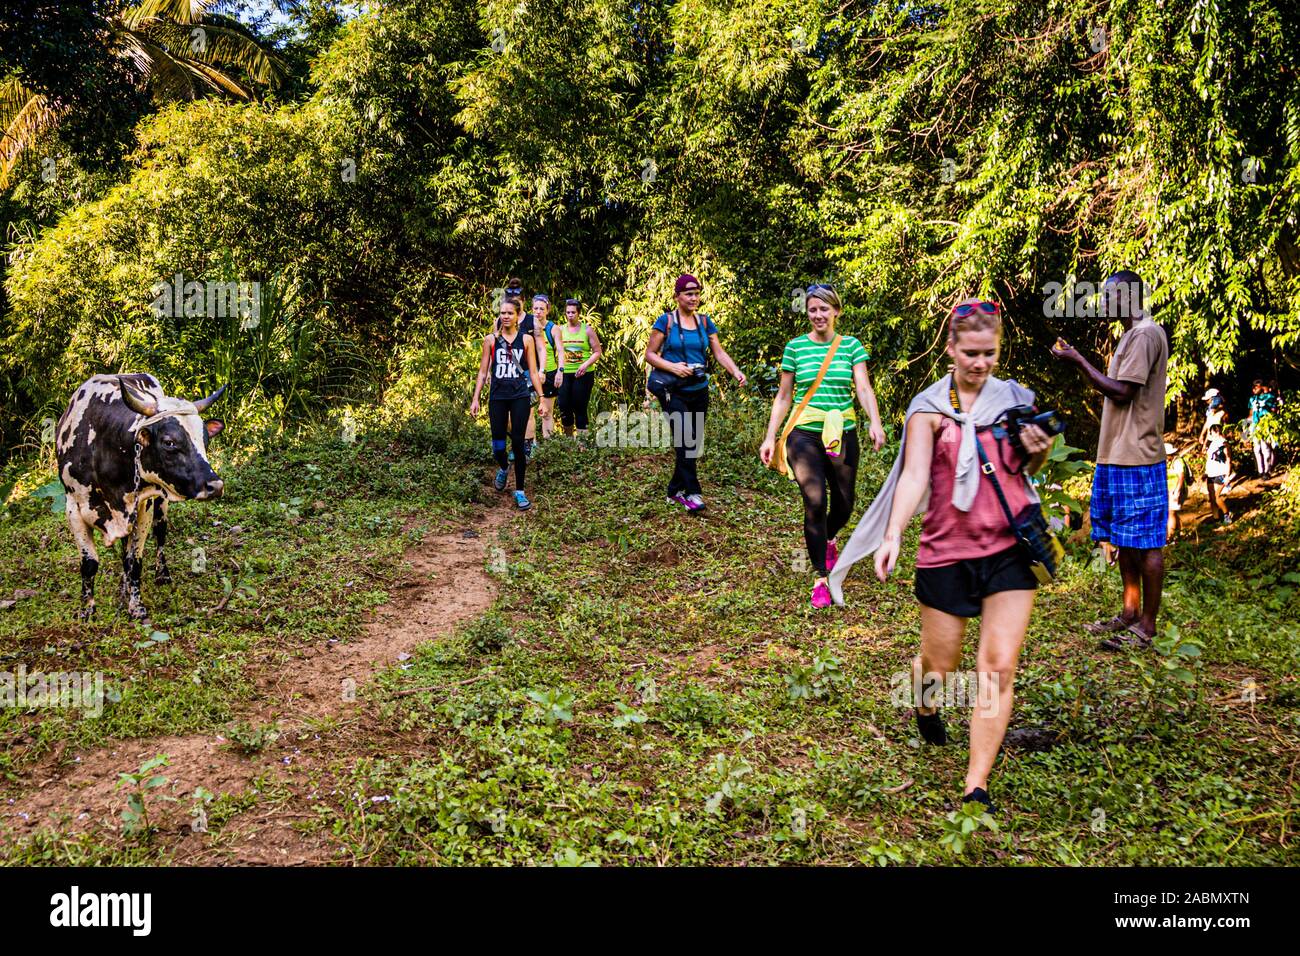 Hash House Harriers Running Event in Happy Hill, Grenada. The cow would rather have her rest Stock Photo